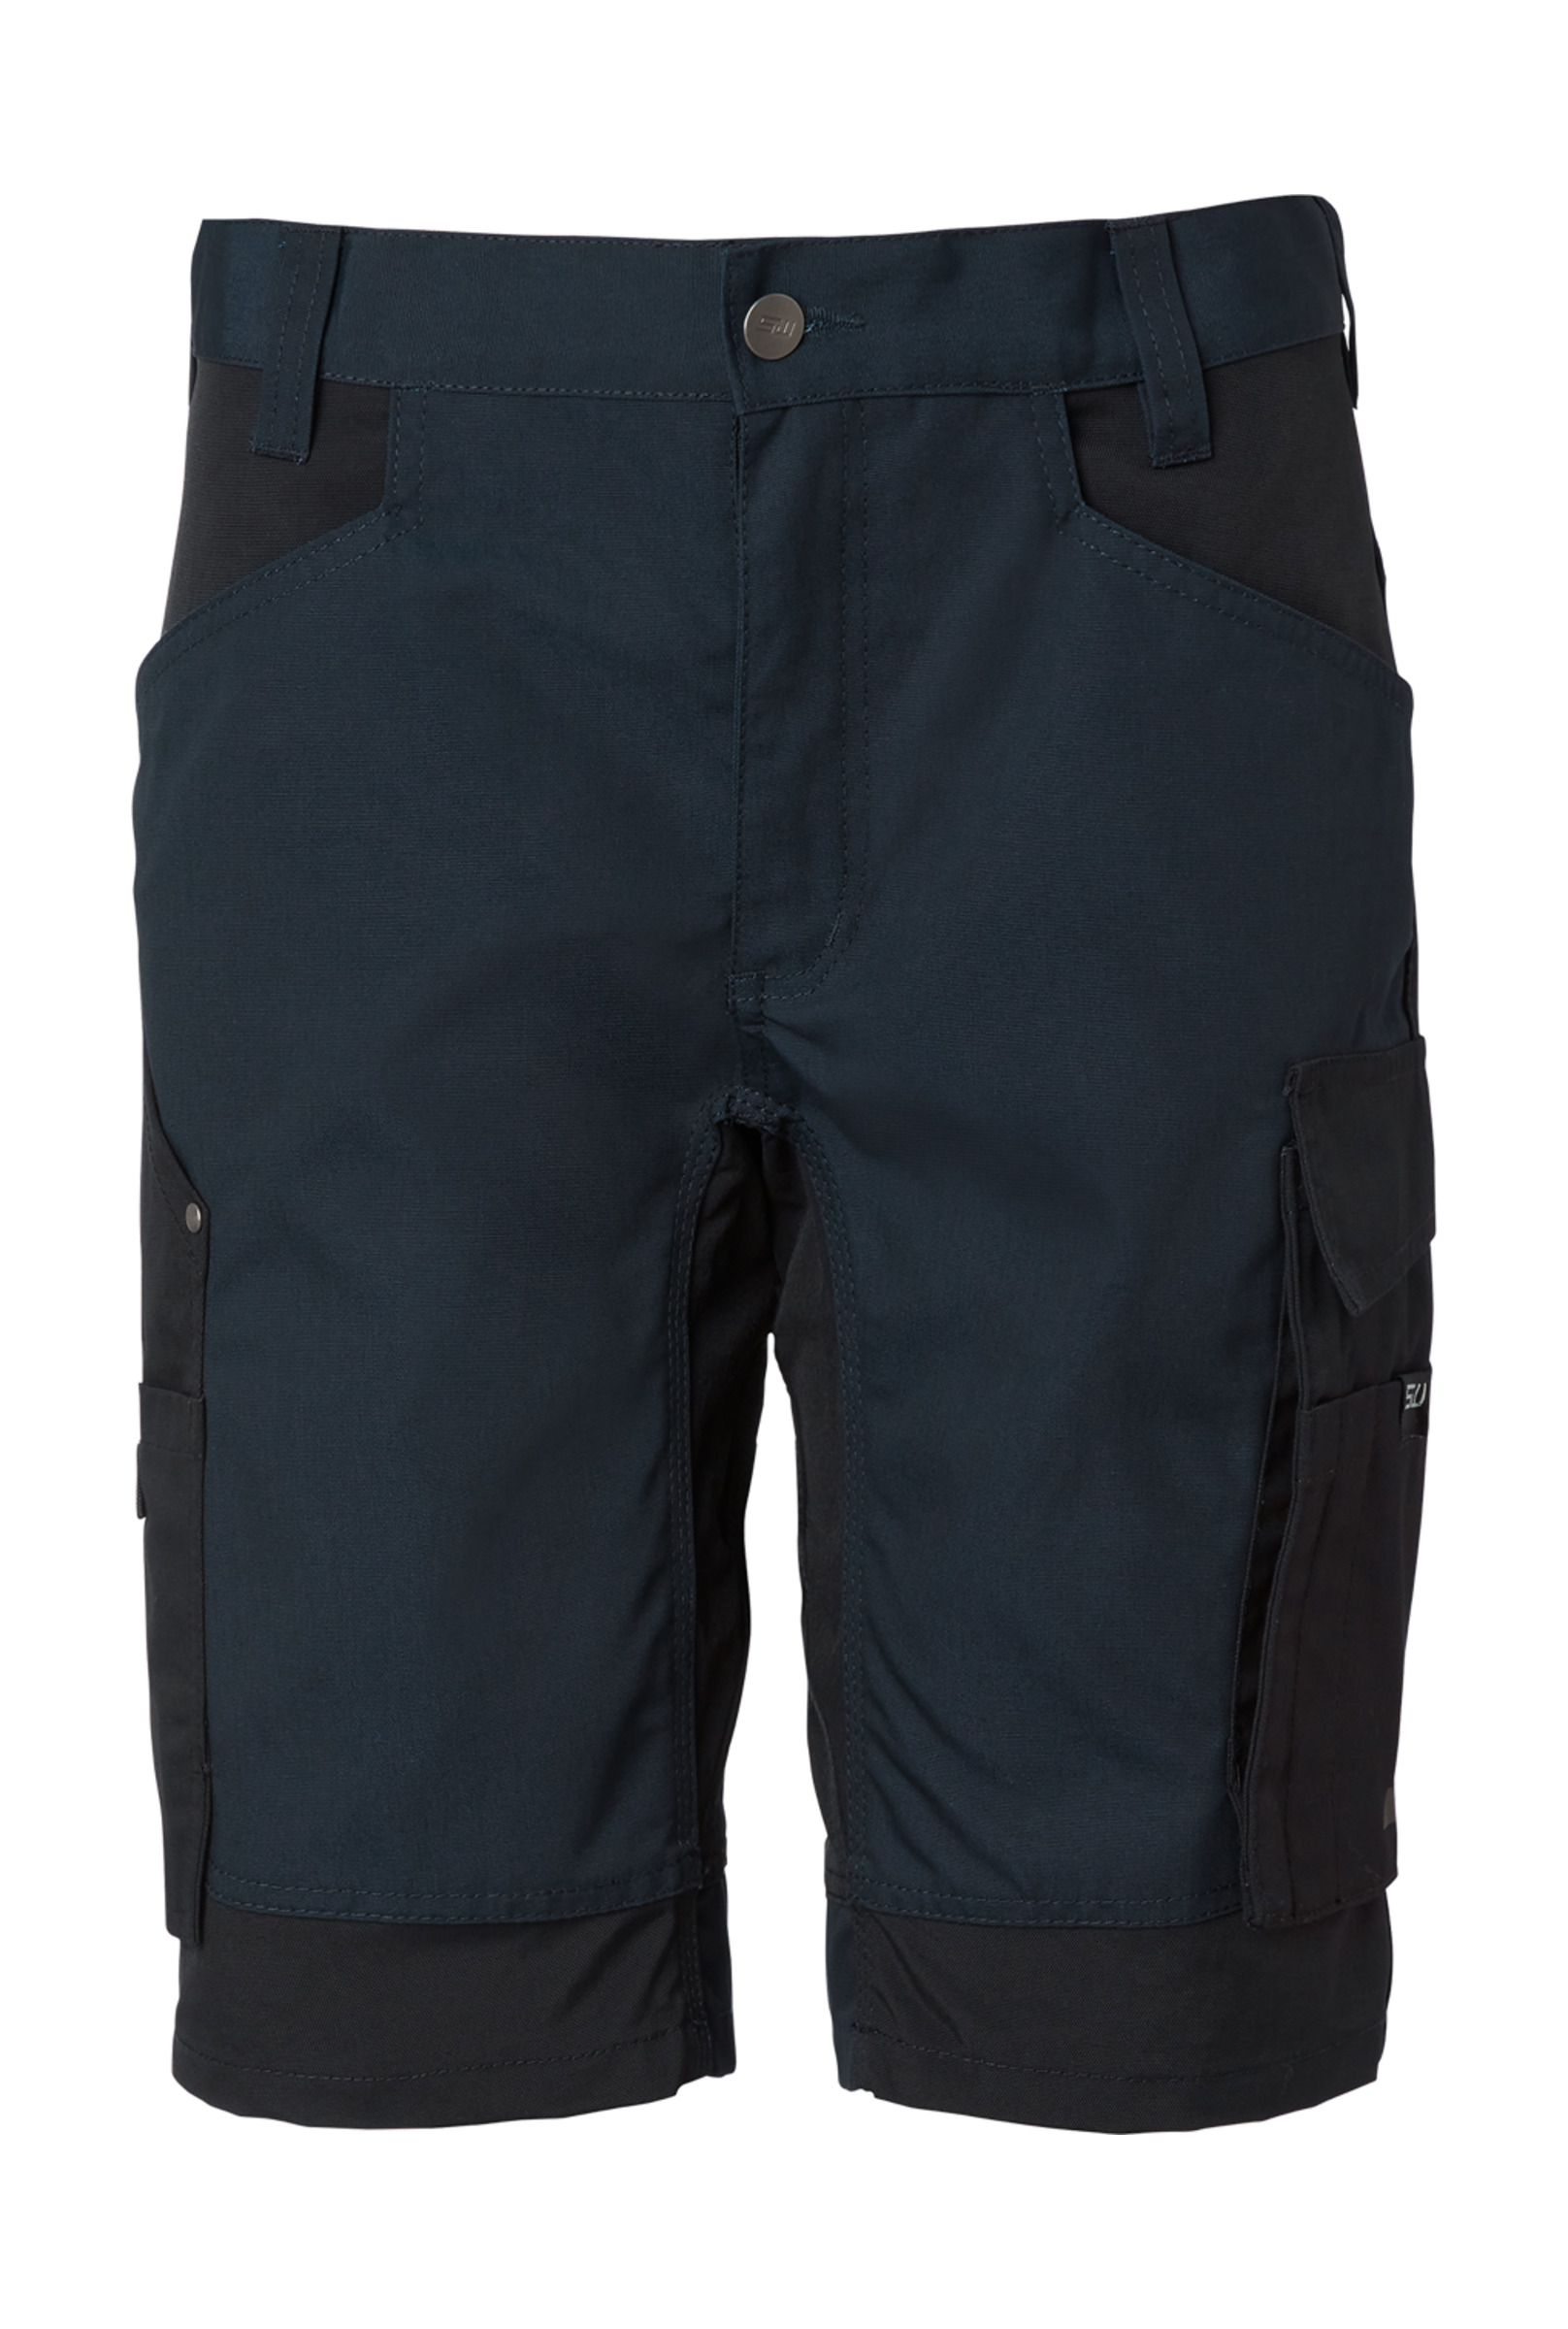 South West Cora Shorts w